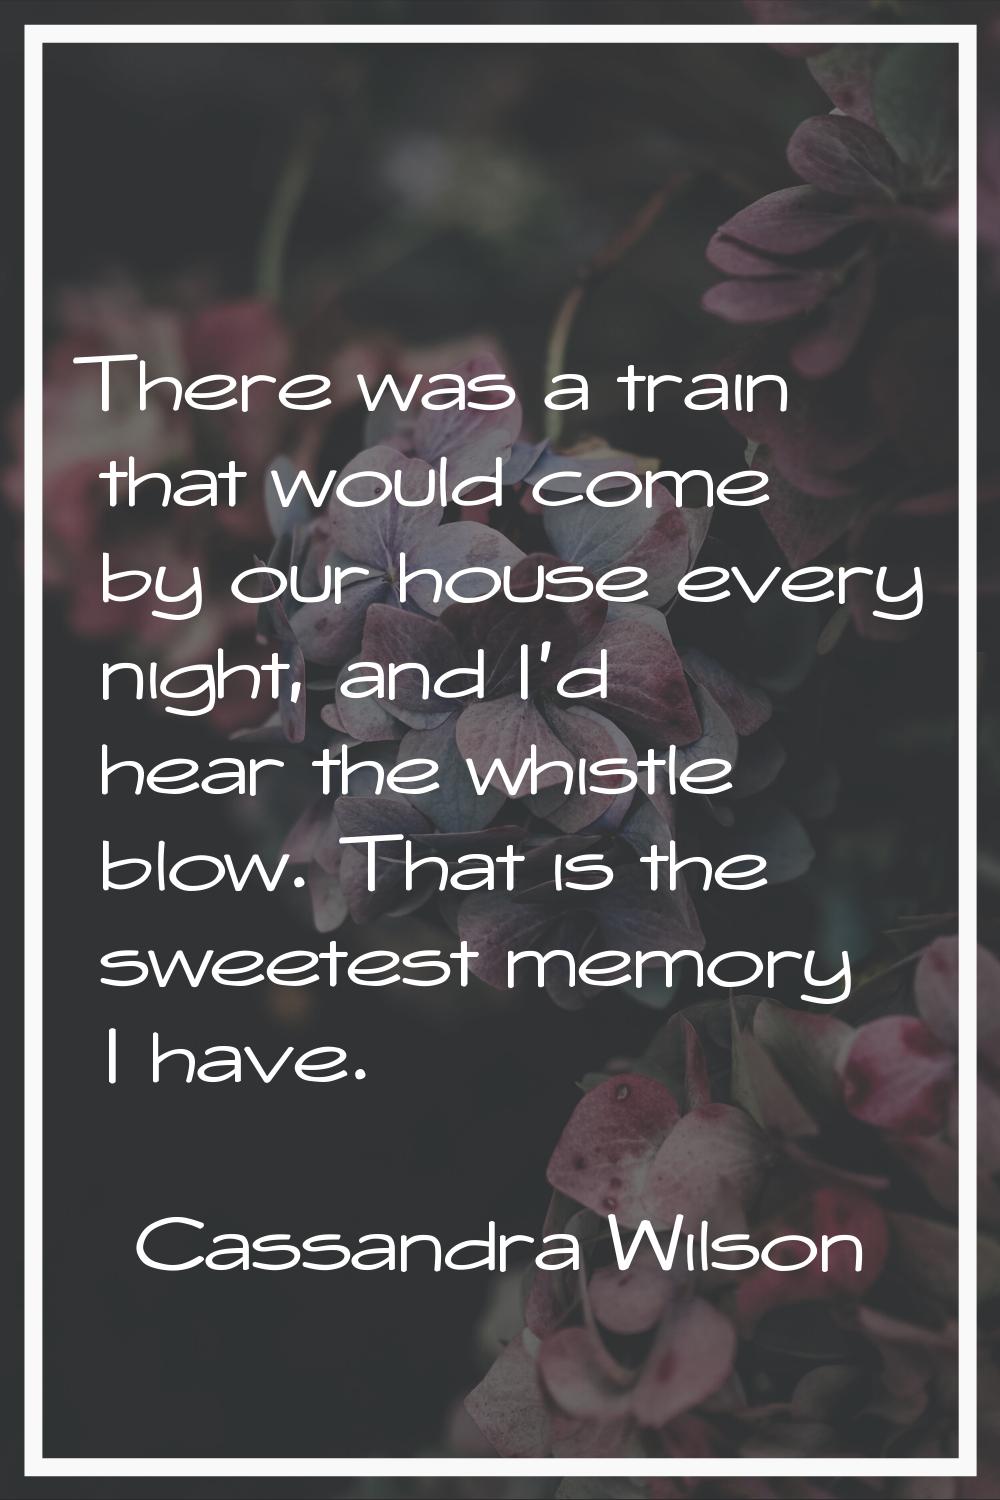 There was a train that would come by our house every night, and I'd hear the whistle blow. That is 